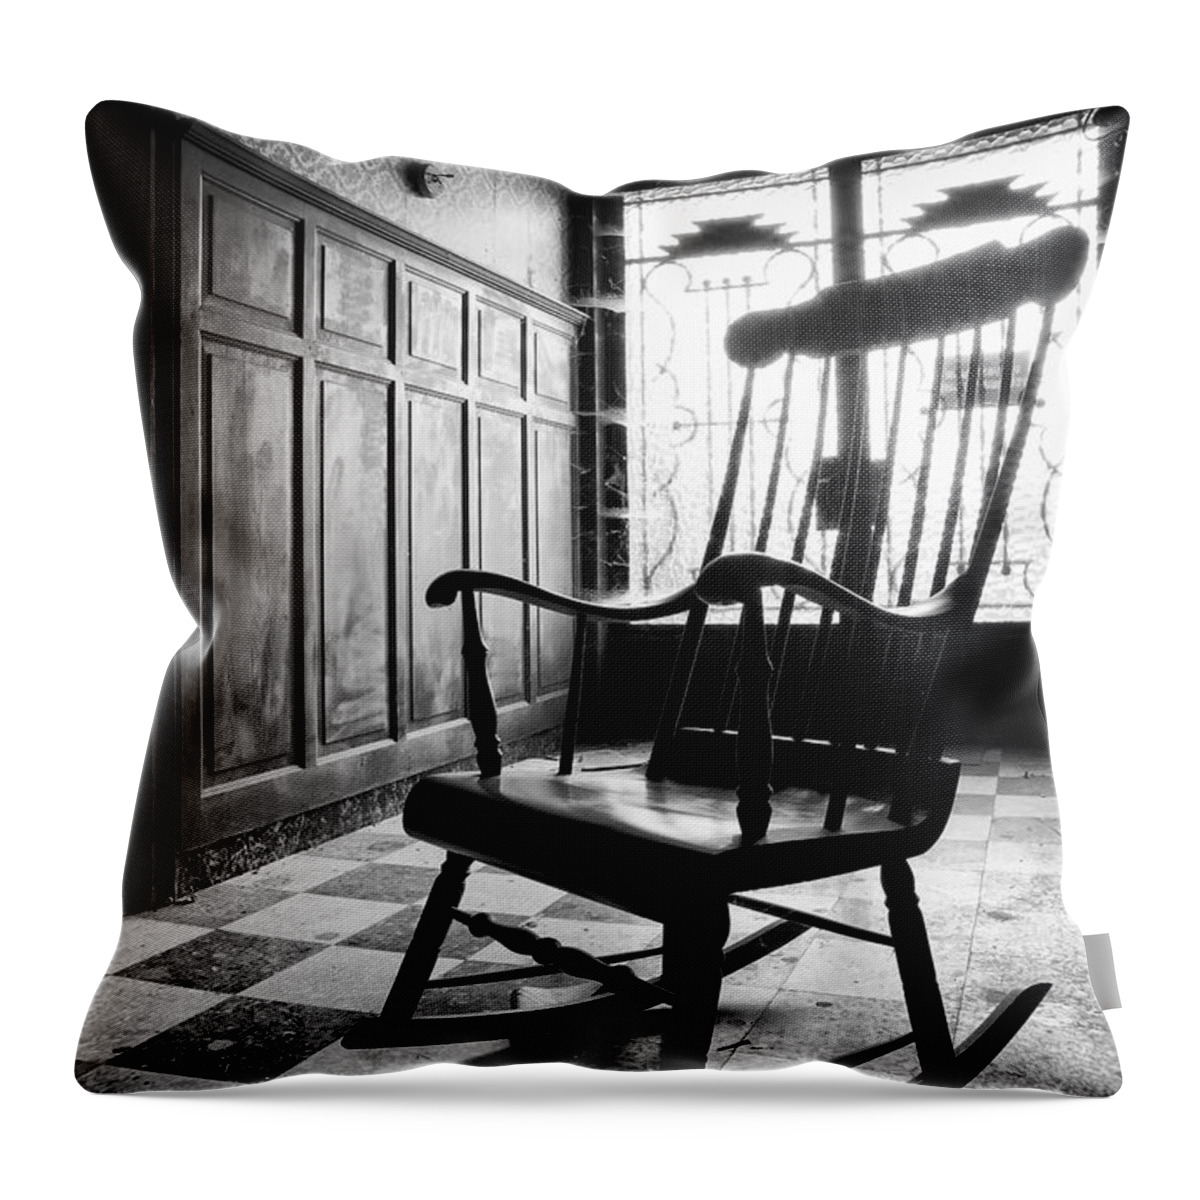 Rocking Chair Abandoned Building Throw Pillow For Sale By Dirk